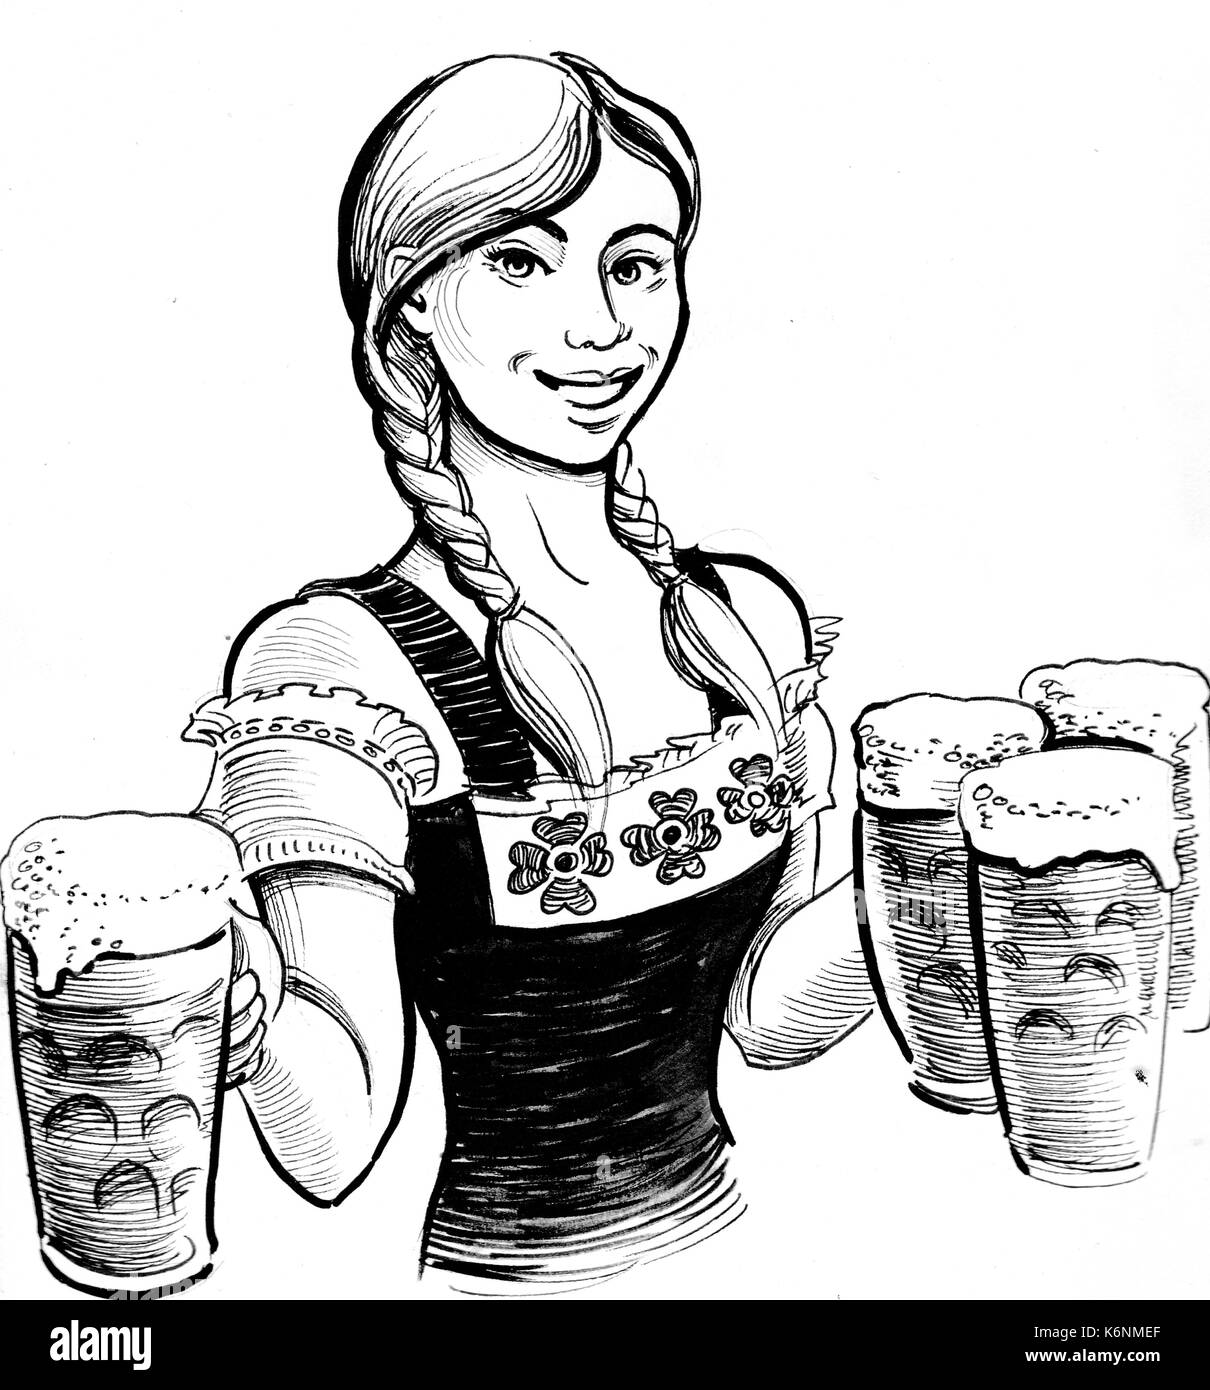 Girl with a beer mugs Stock Photo